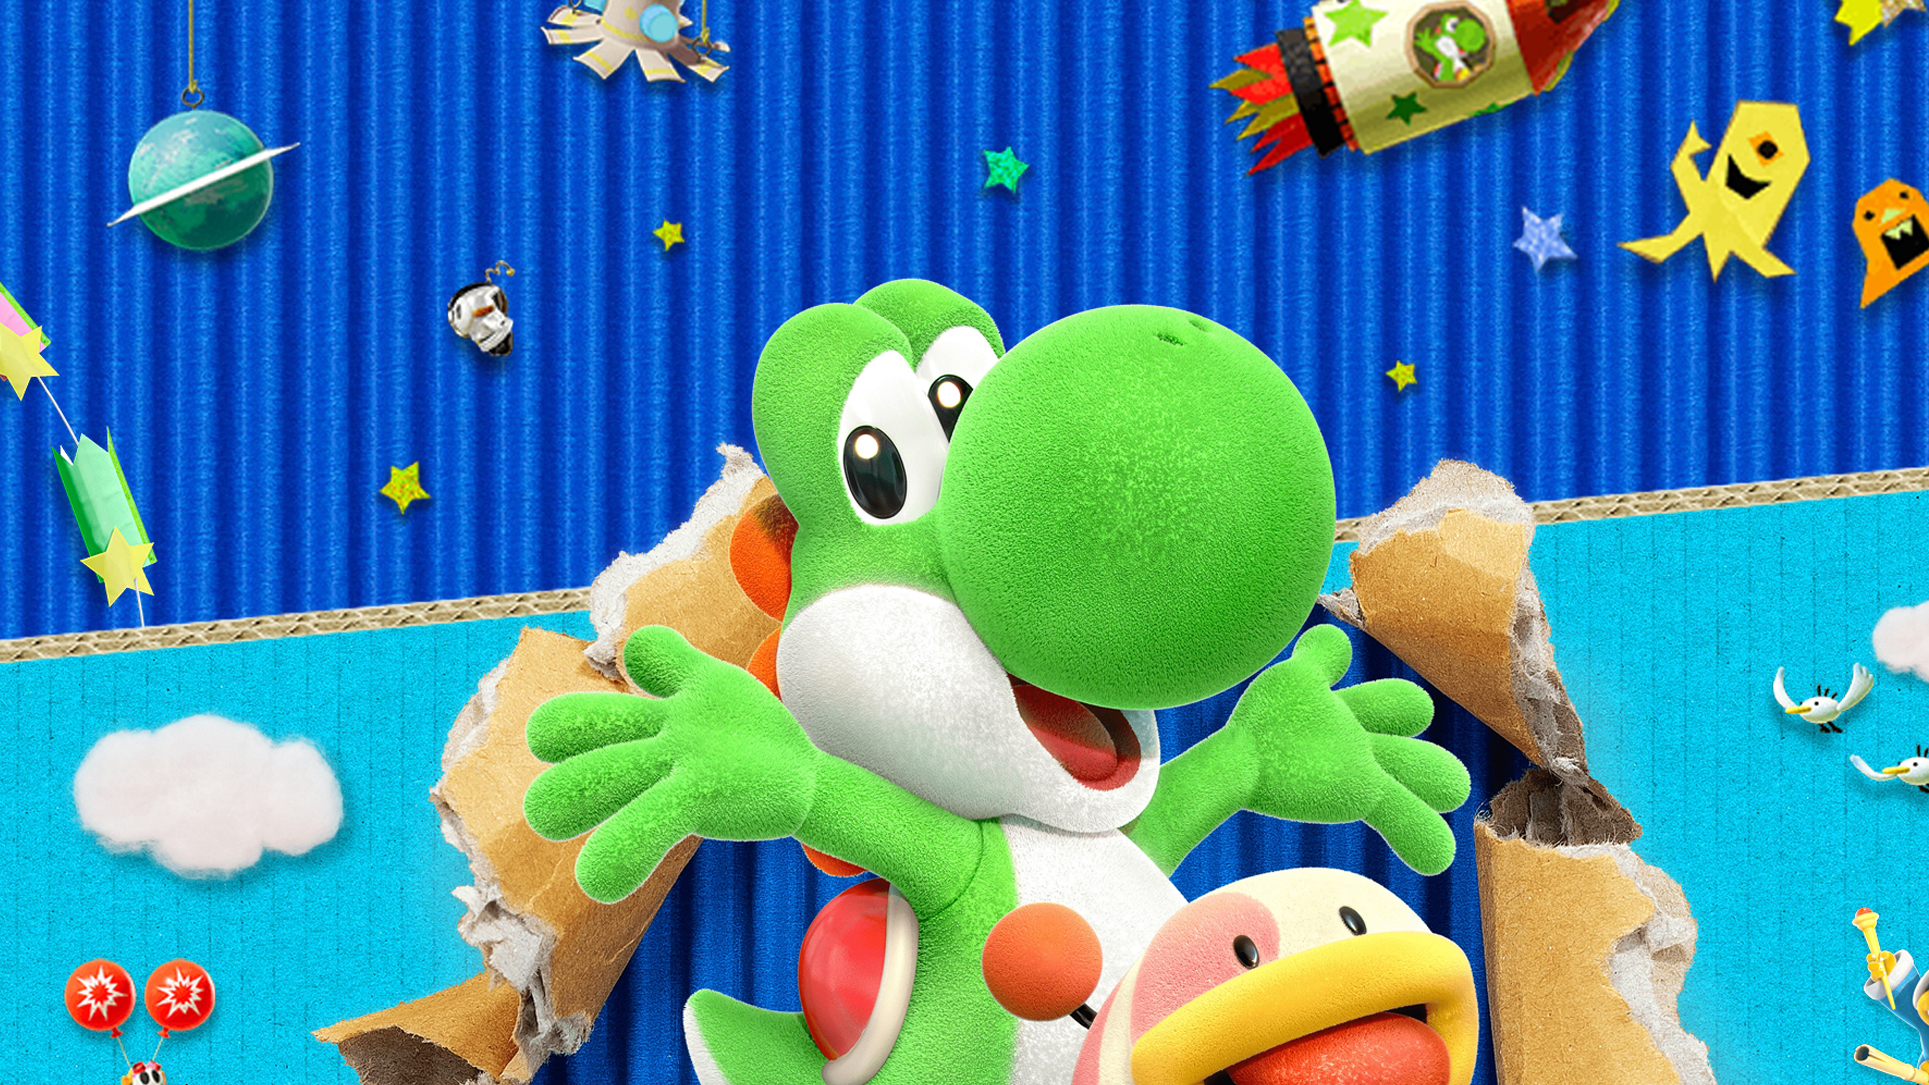 yoshi's crafted world sales